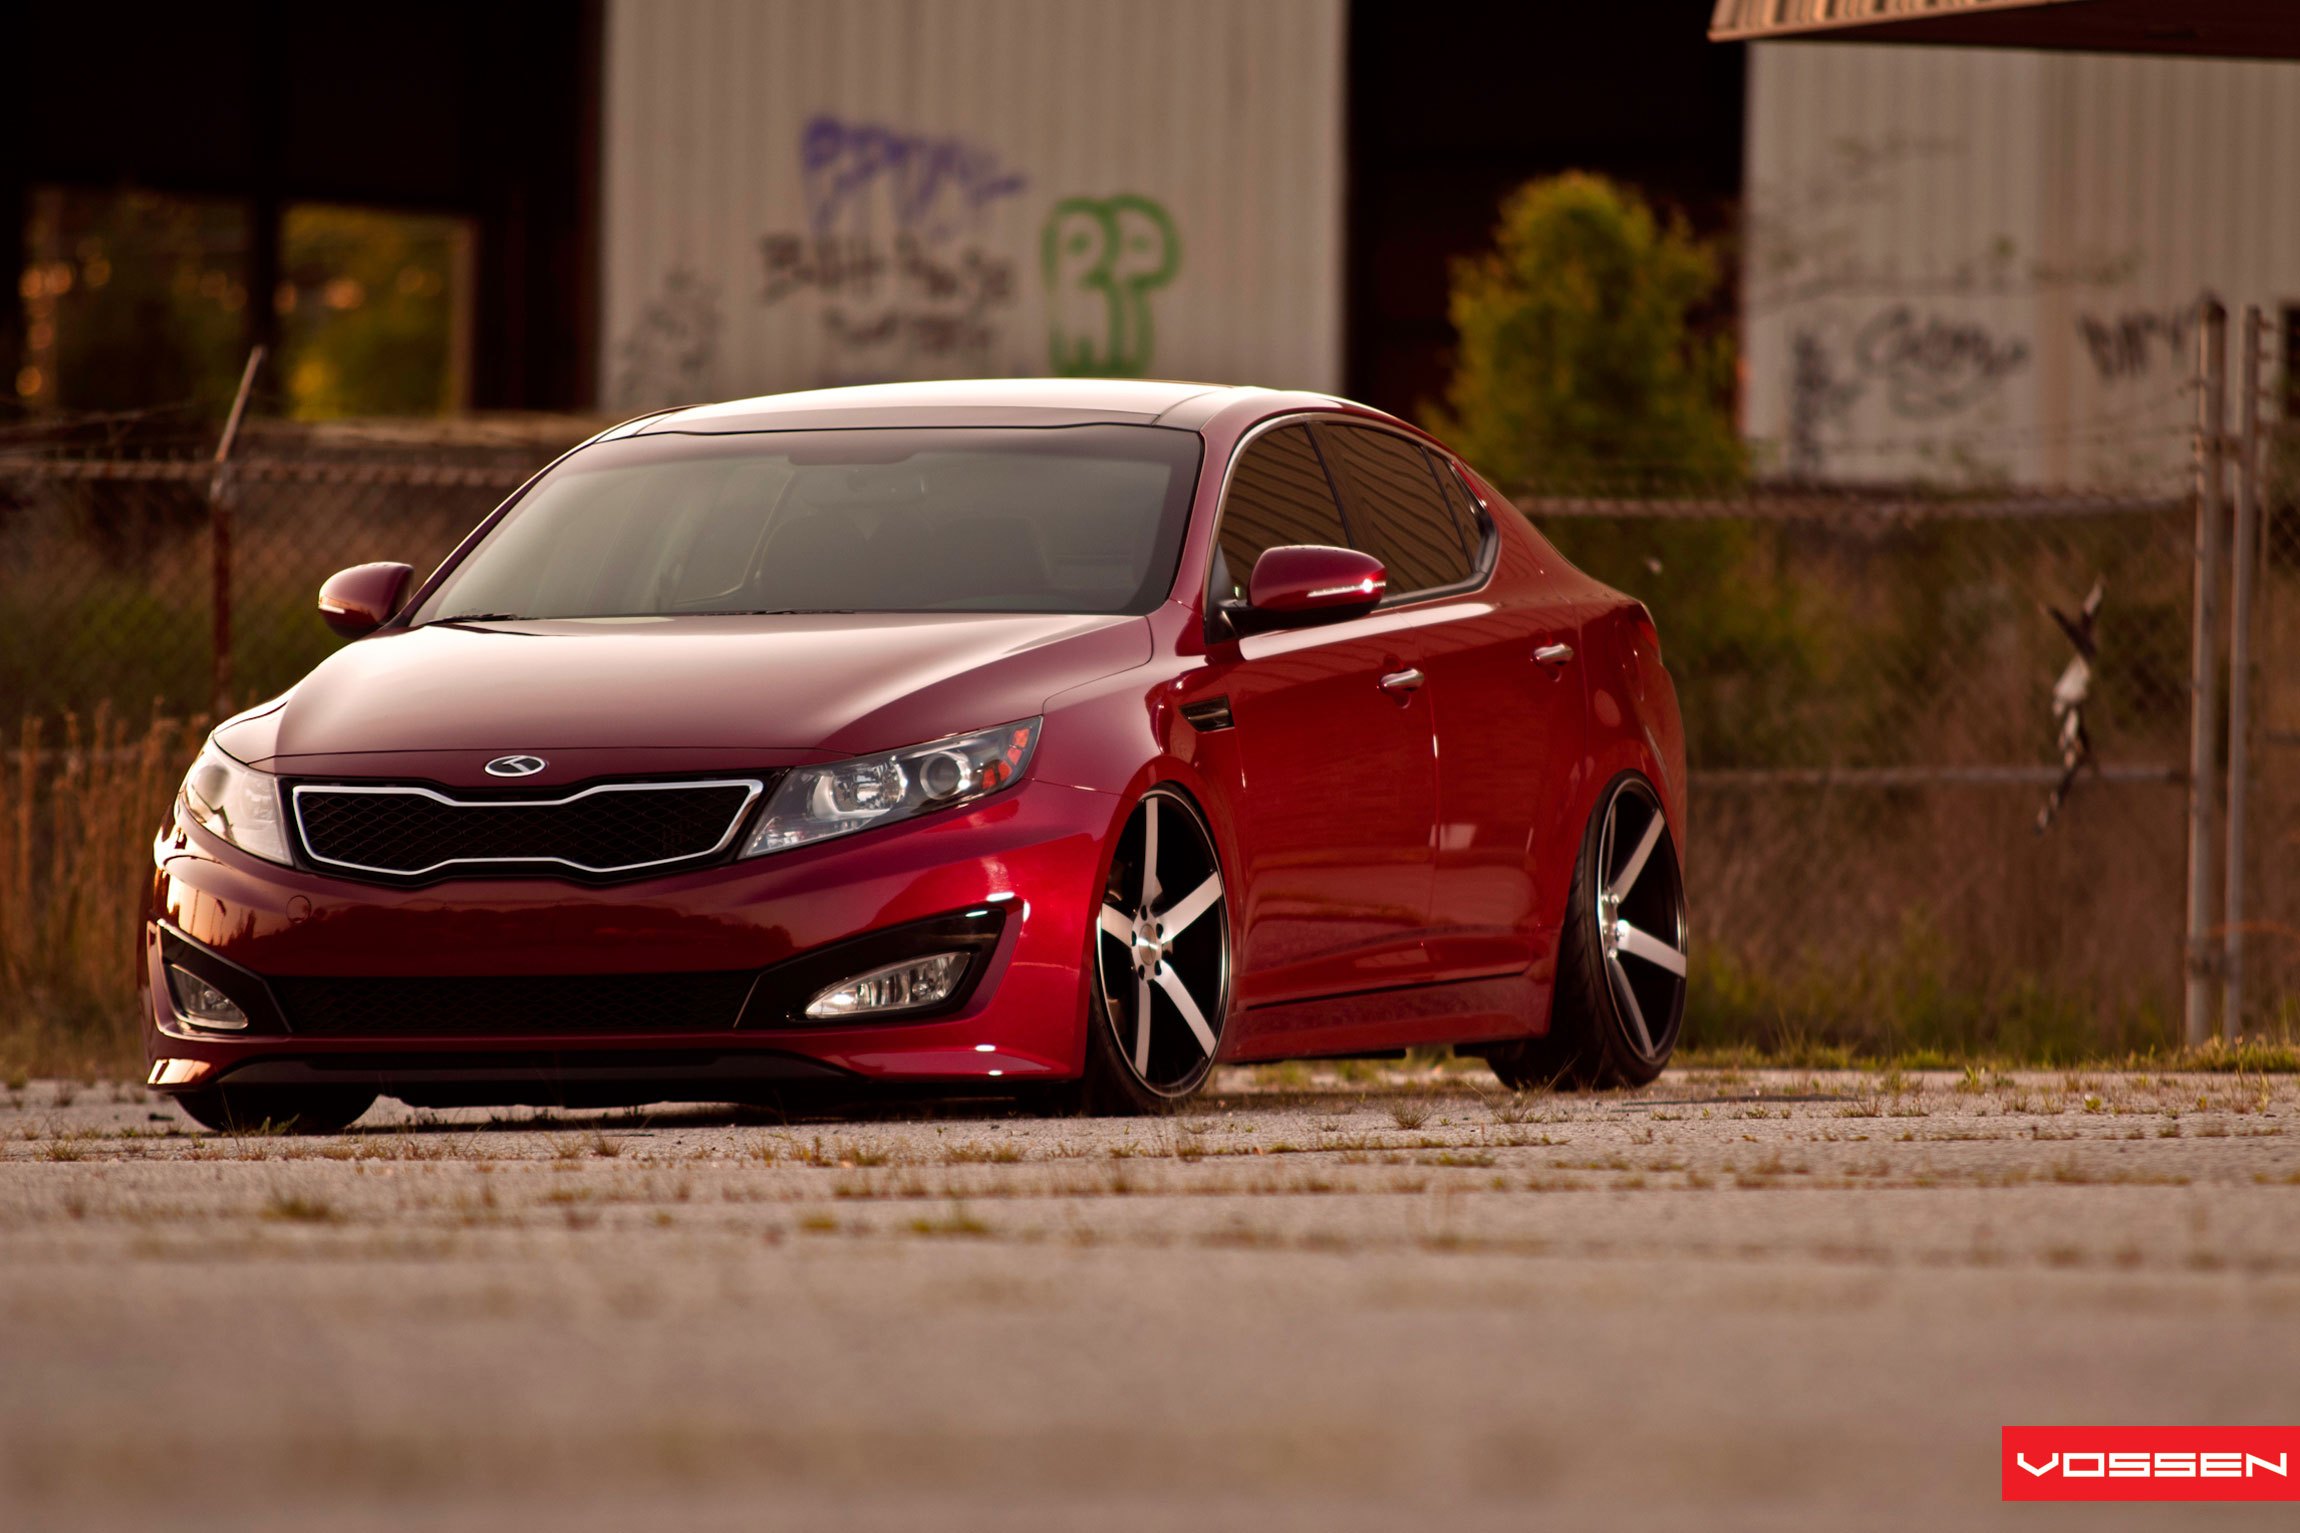 Red Kia Optima with Custom Grille - Photo by Vossen